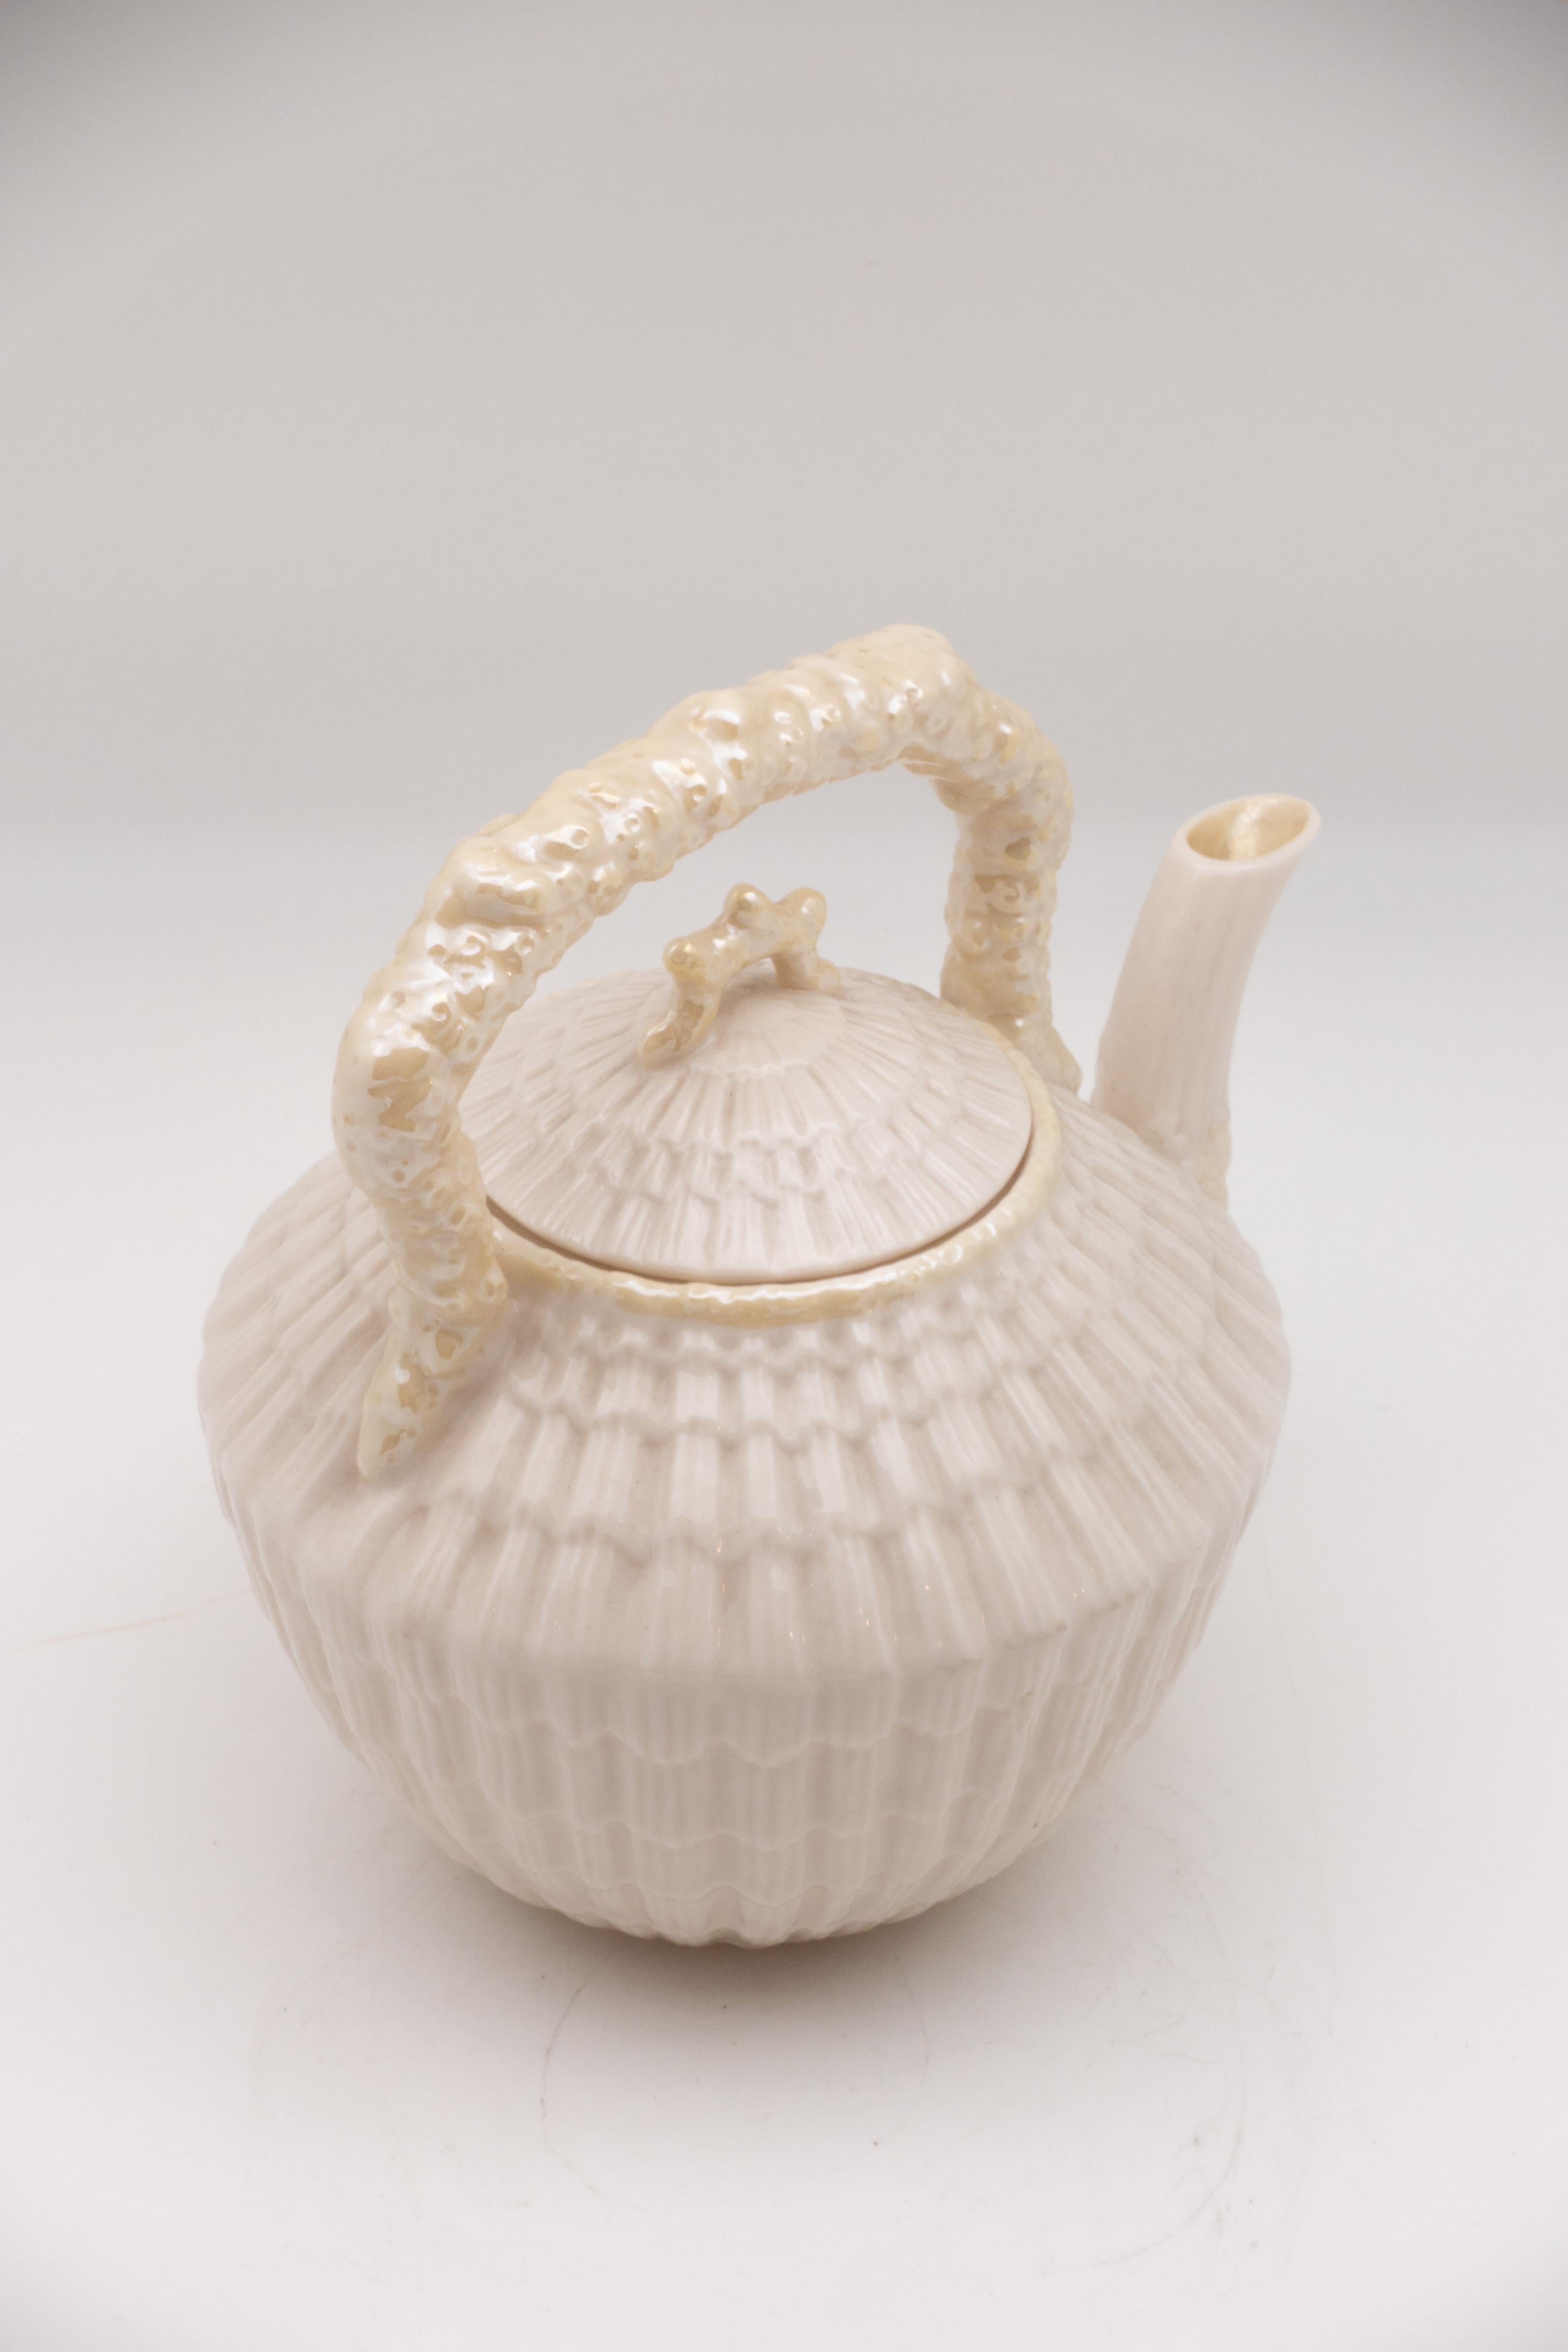 Vintage Belleek teapot/kettle with coral motif. Green mark on base from 6th period (1965-1980).